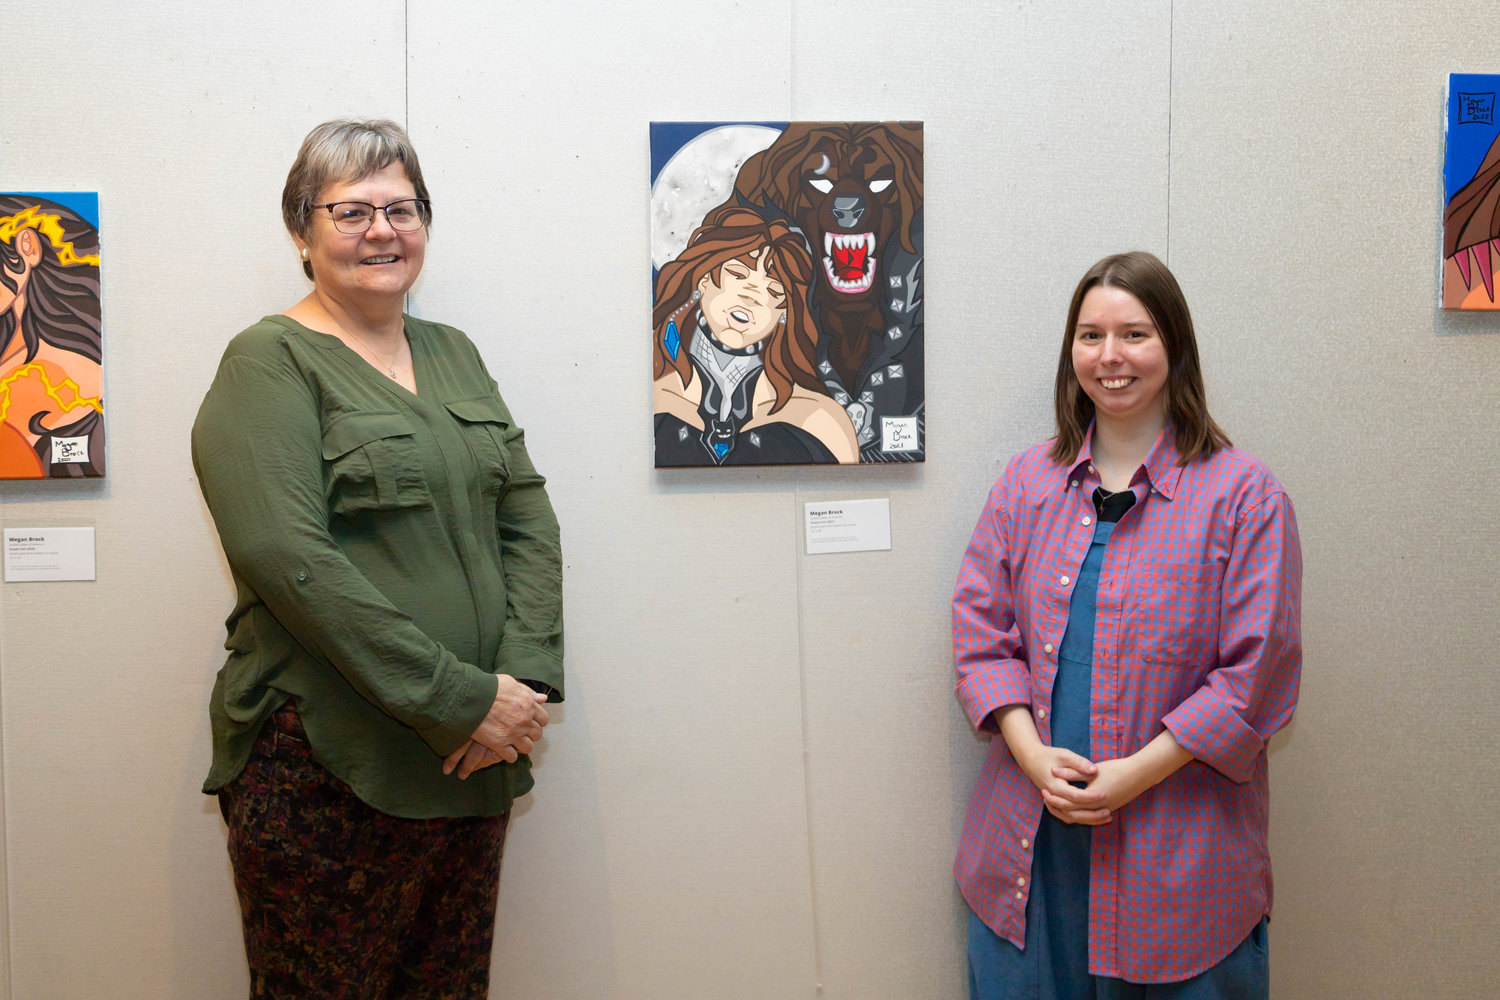 Jane Olgschlagger Jaecques, left, attends the artist’s reception for Megan Brock, a former student, at Jorgenson Fine Arts Gallery in Moberly. Brock credits the teacher with introducing her to werewolves and inspiring her to read and write.